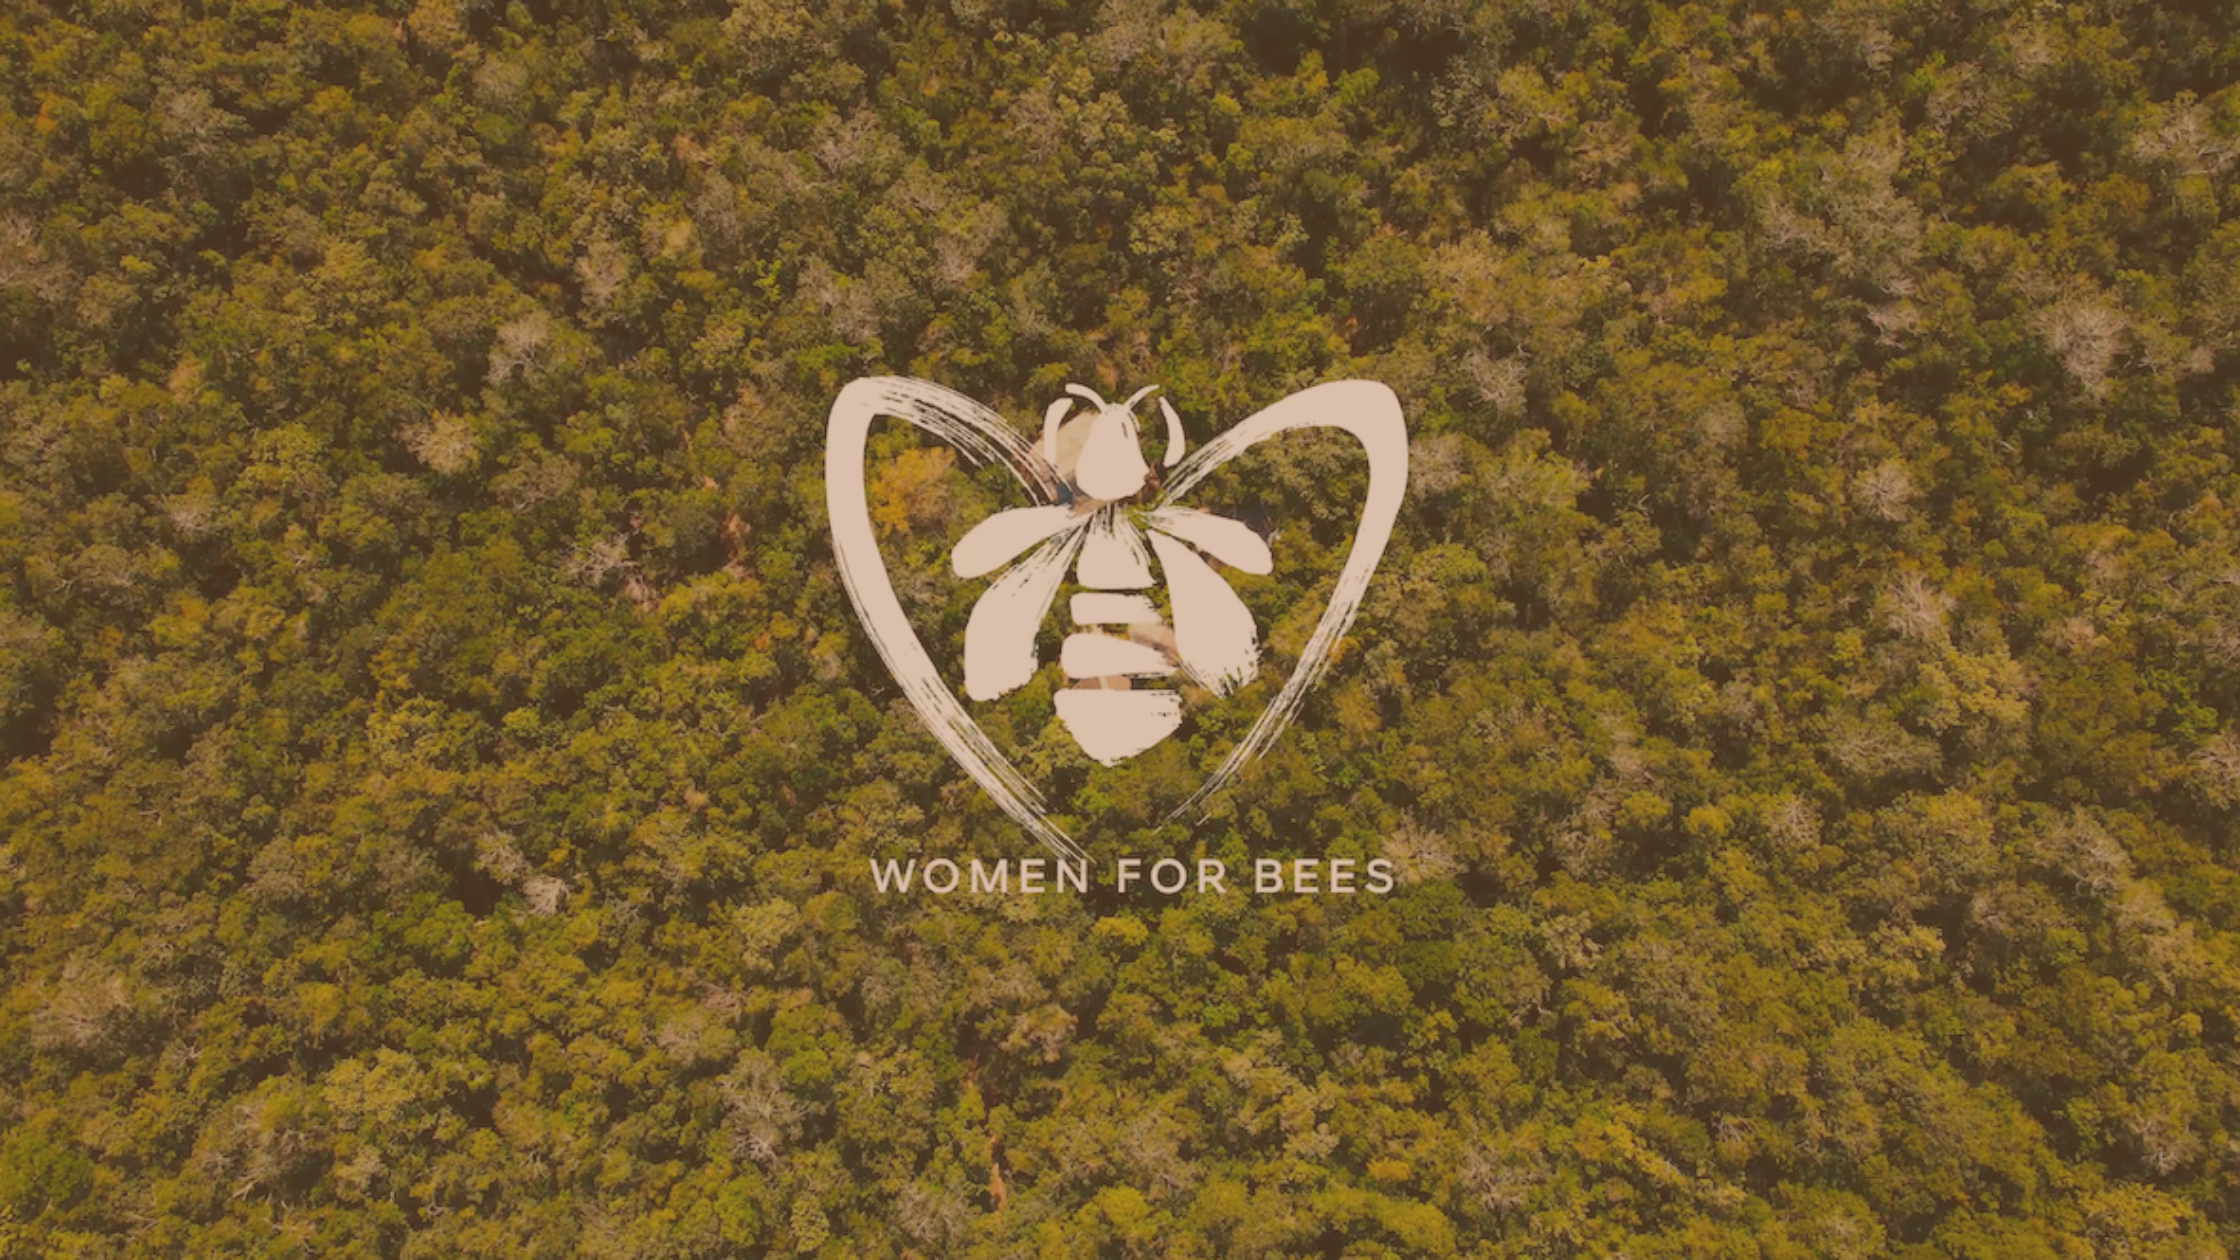 Women for Bees – Humanity for Bees.